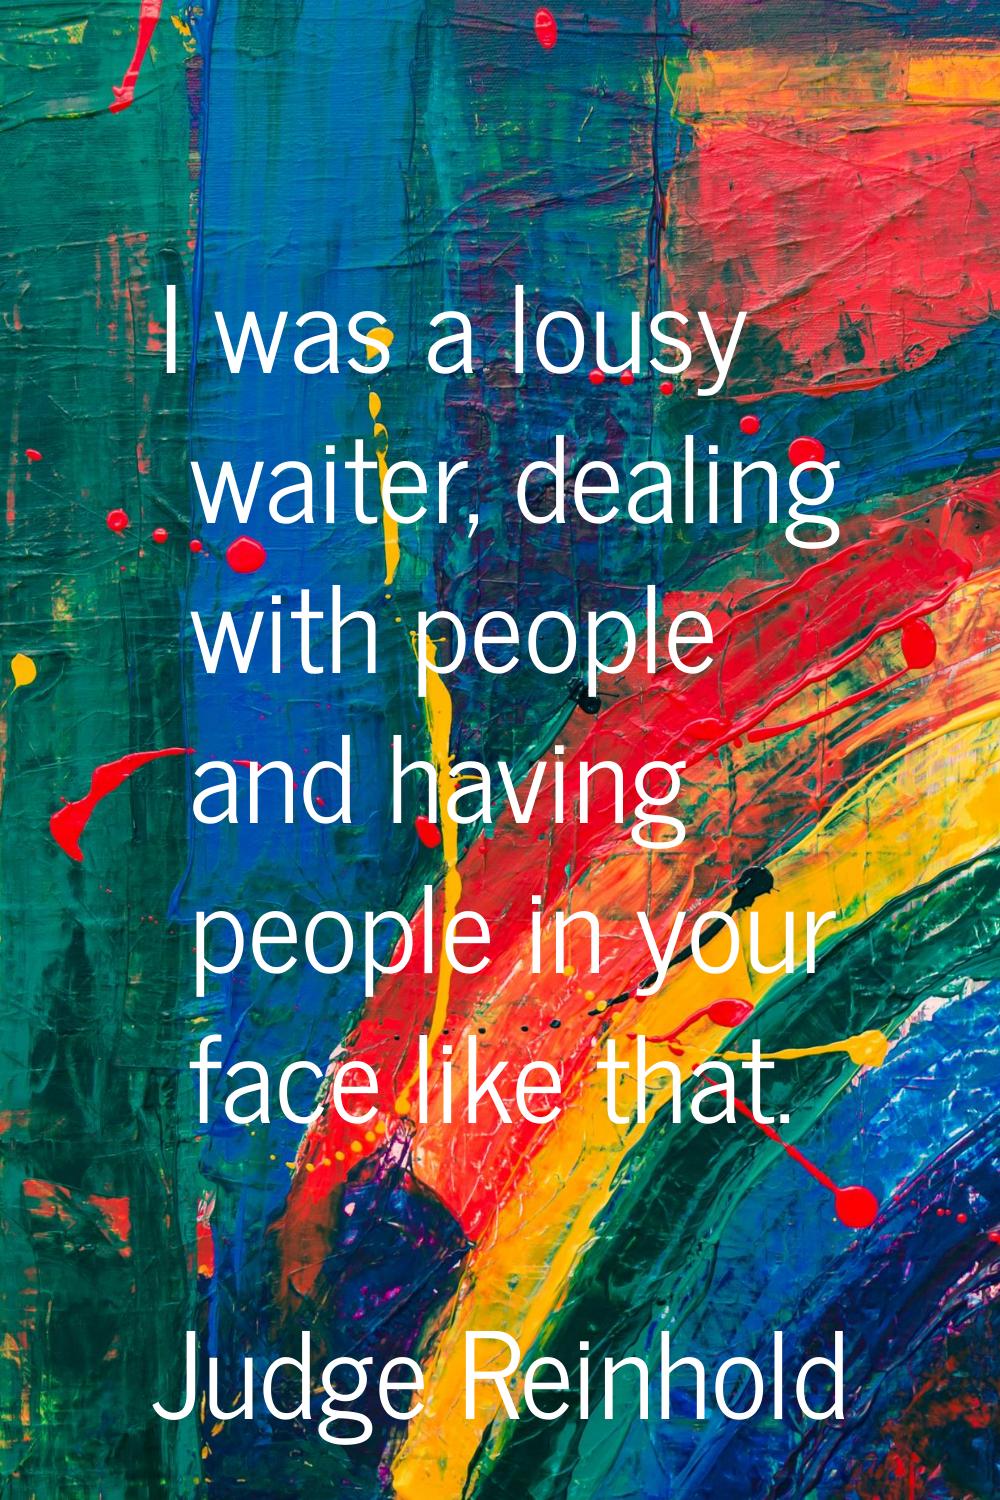 I was a lousy waiter, dealing with people and having people in your face like that.